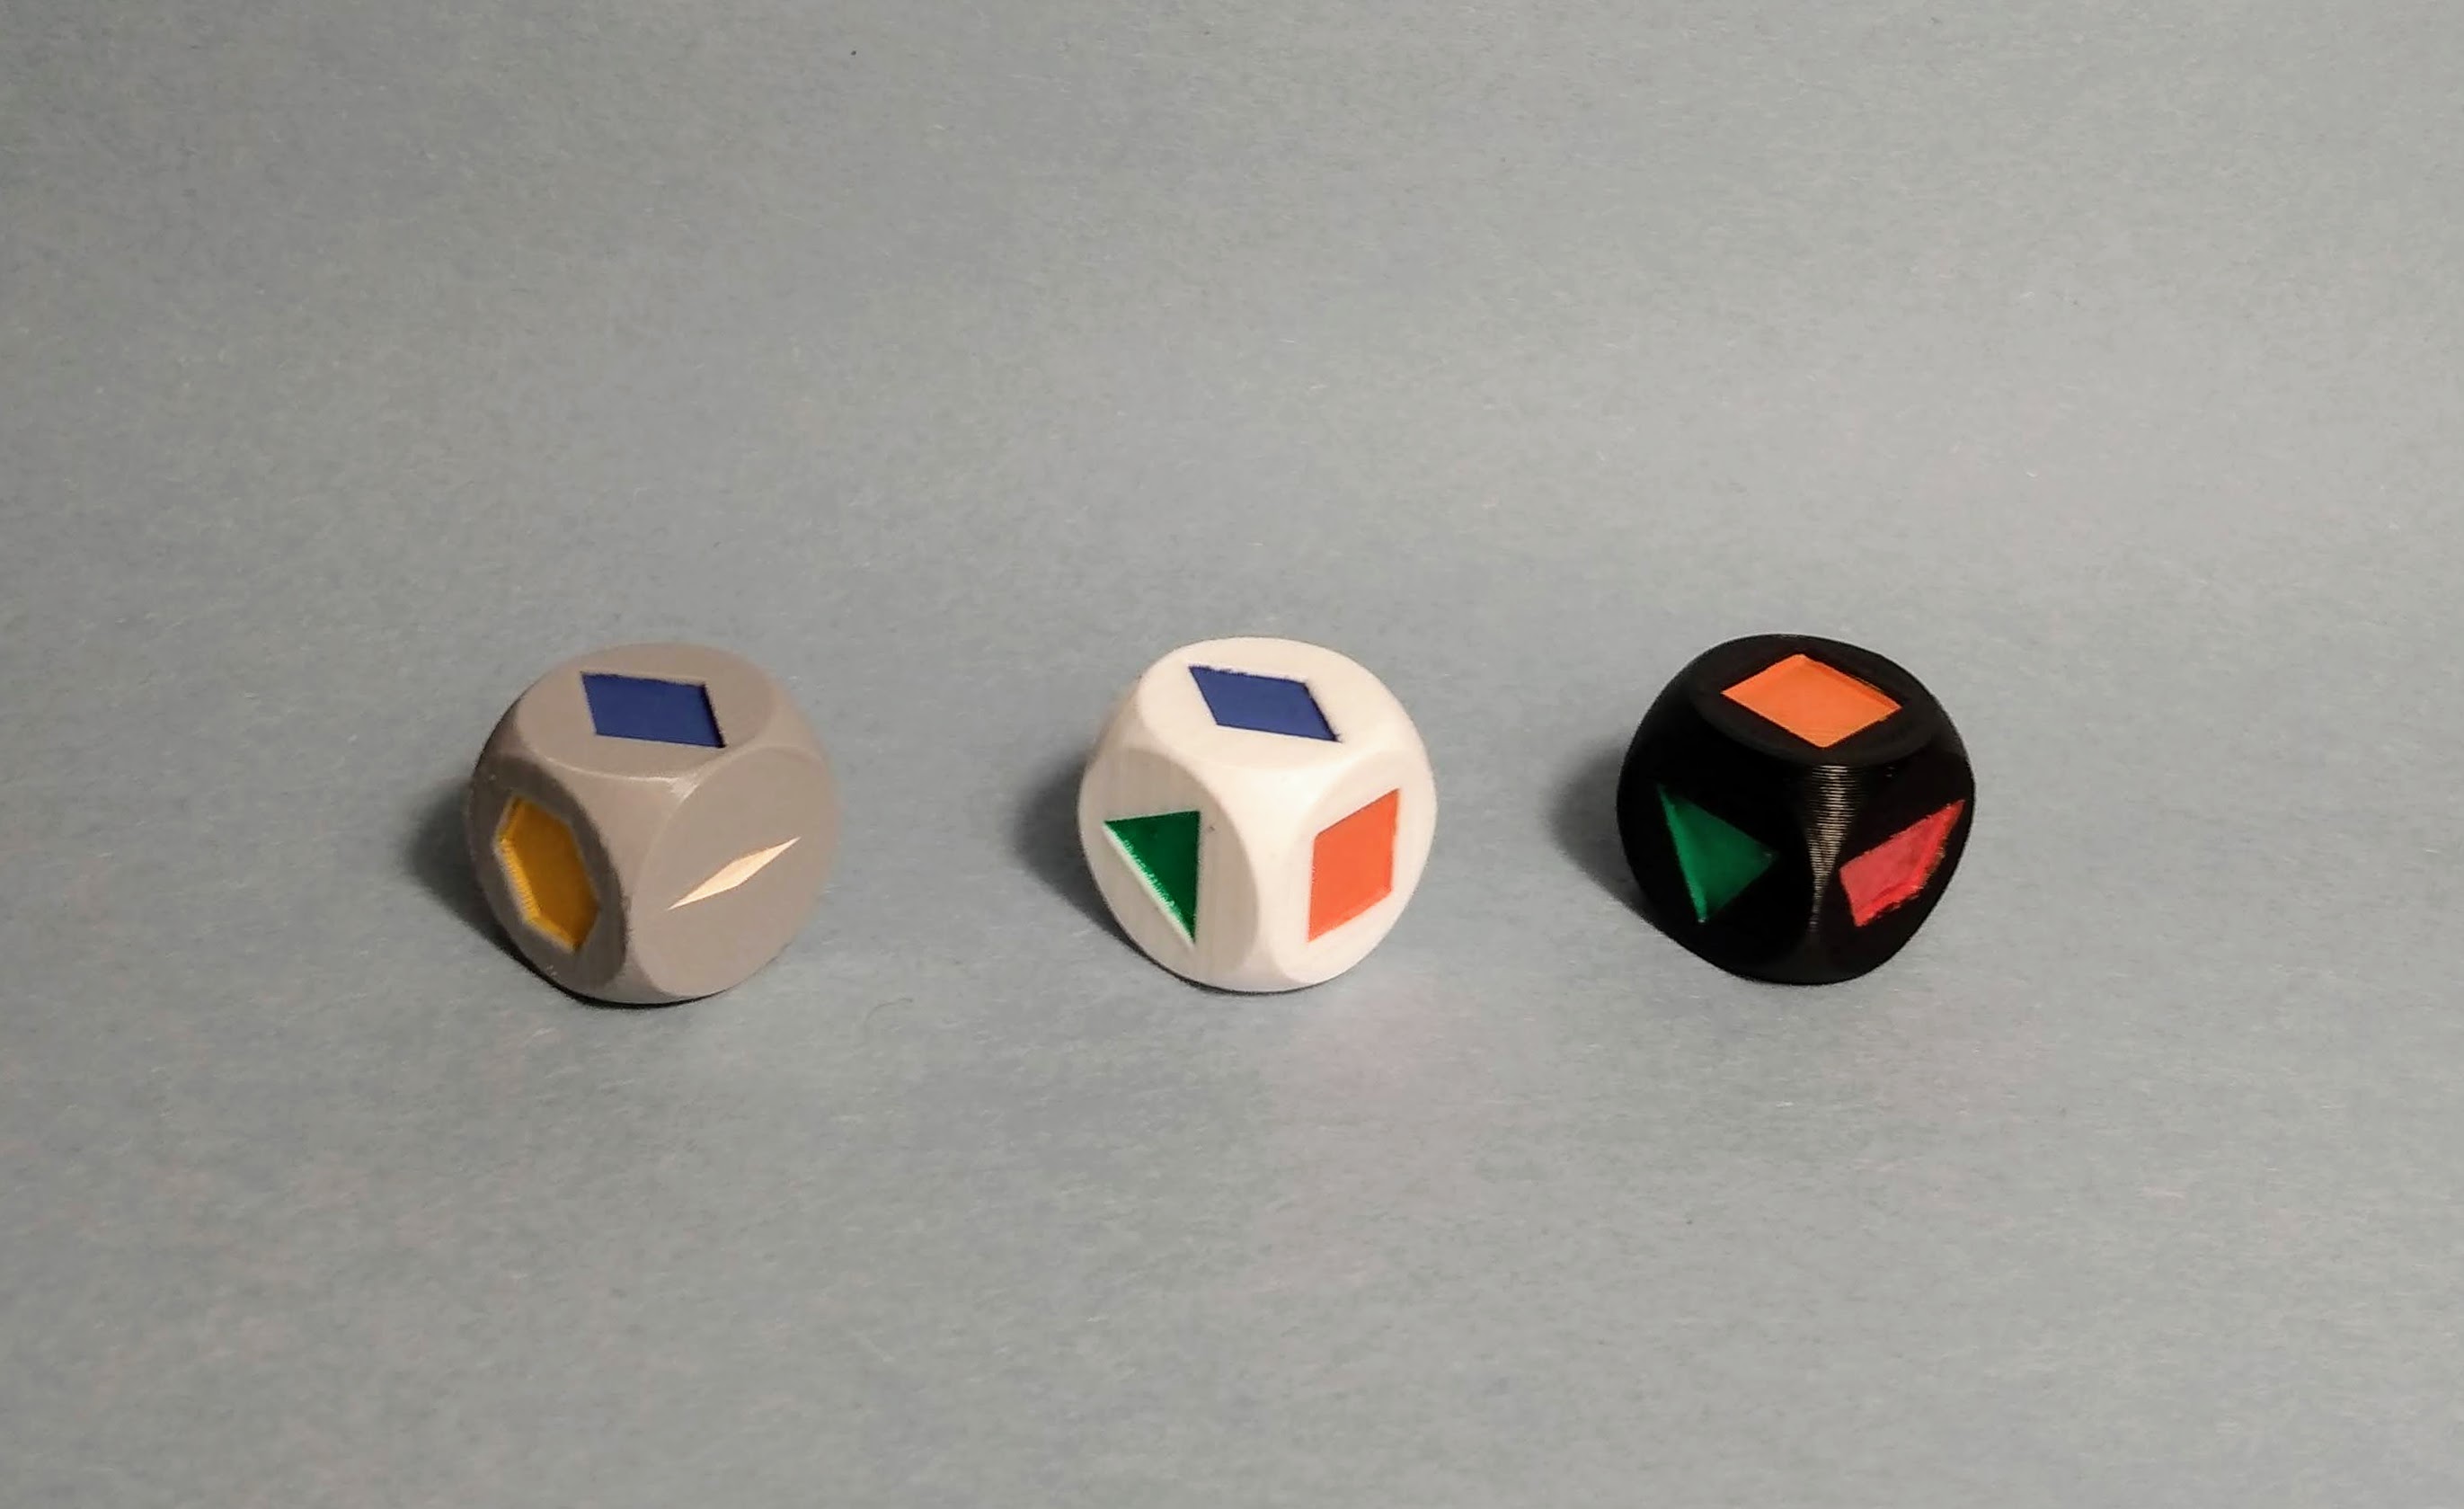 Pattern Block Dice (and Games!)